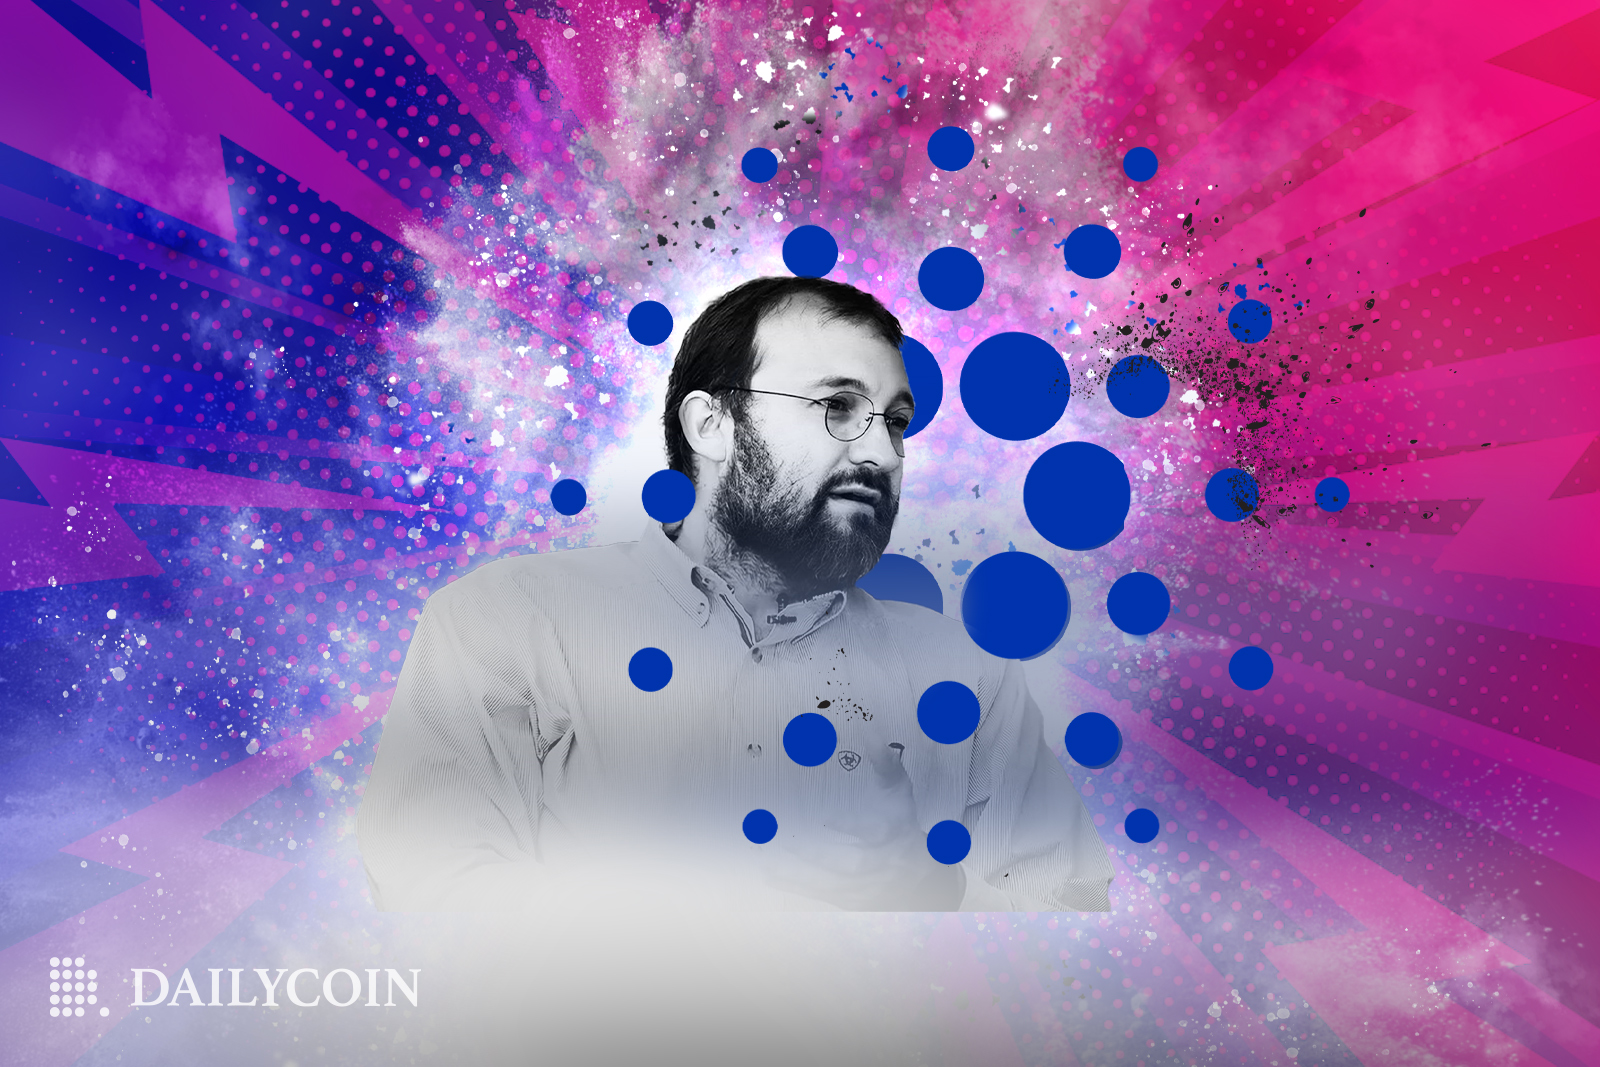 Cardano founder Charles Hoskinson surrounded by blue dots found in Cardano logo.